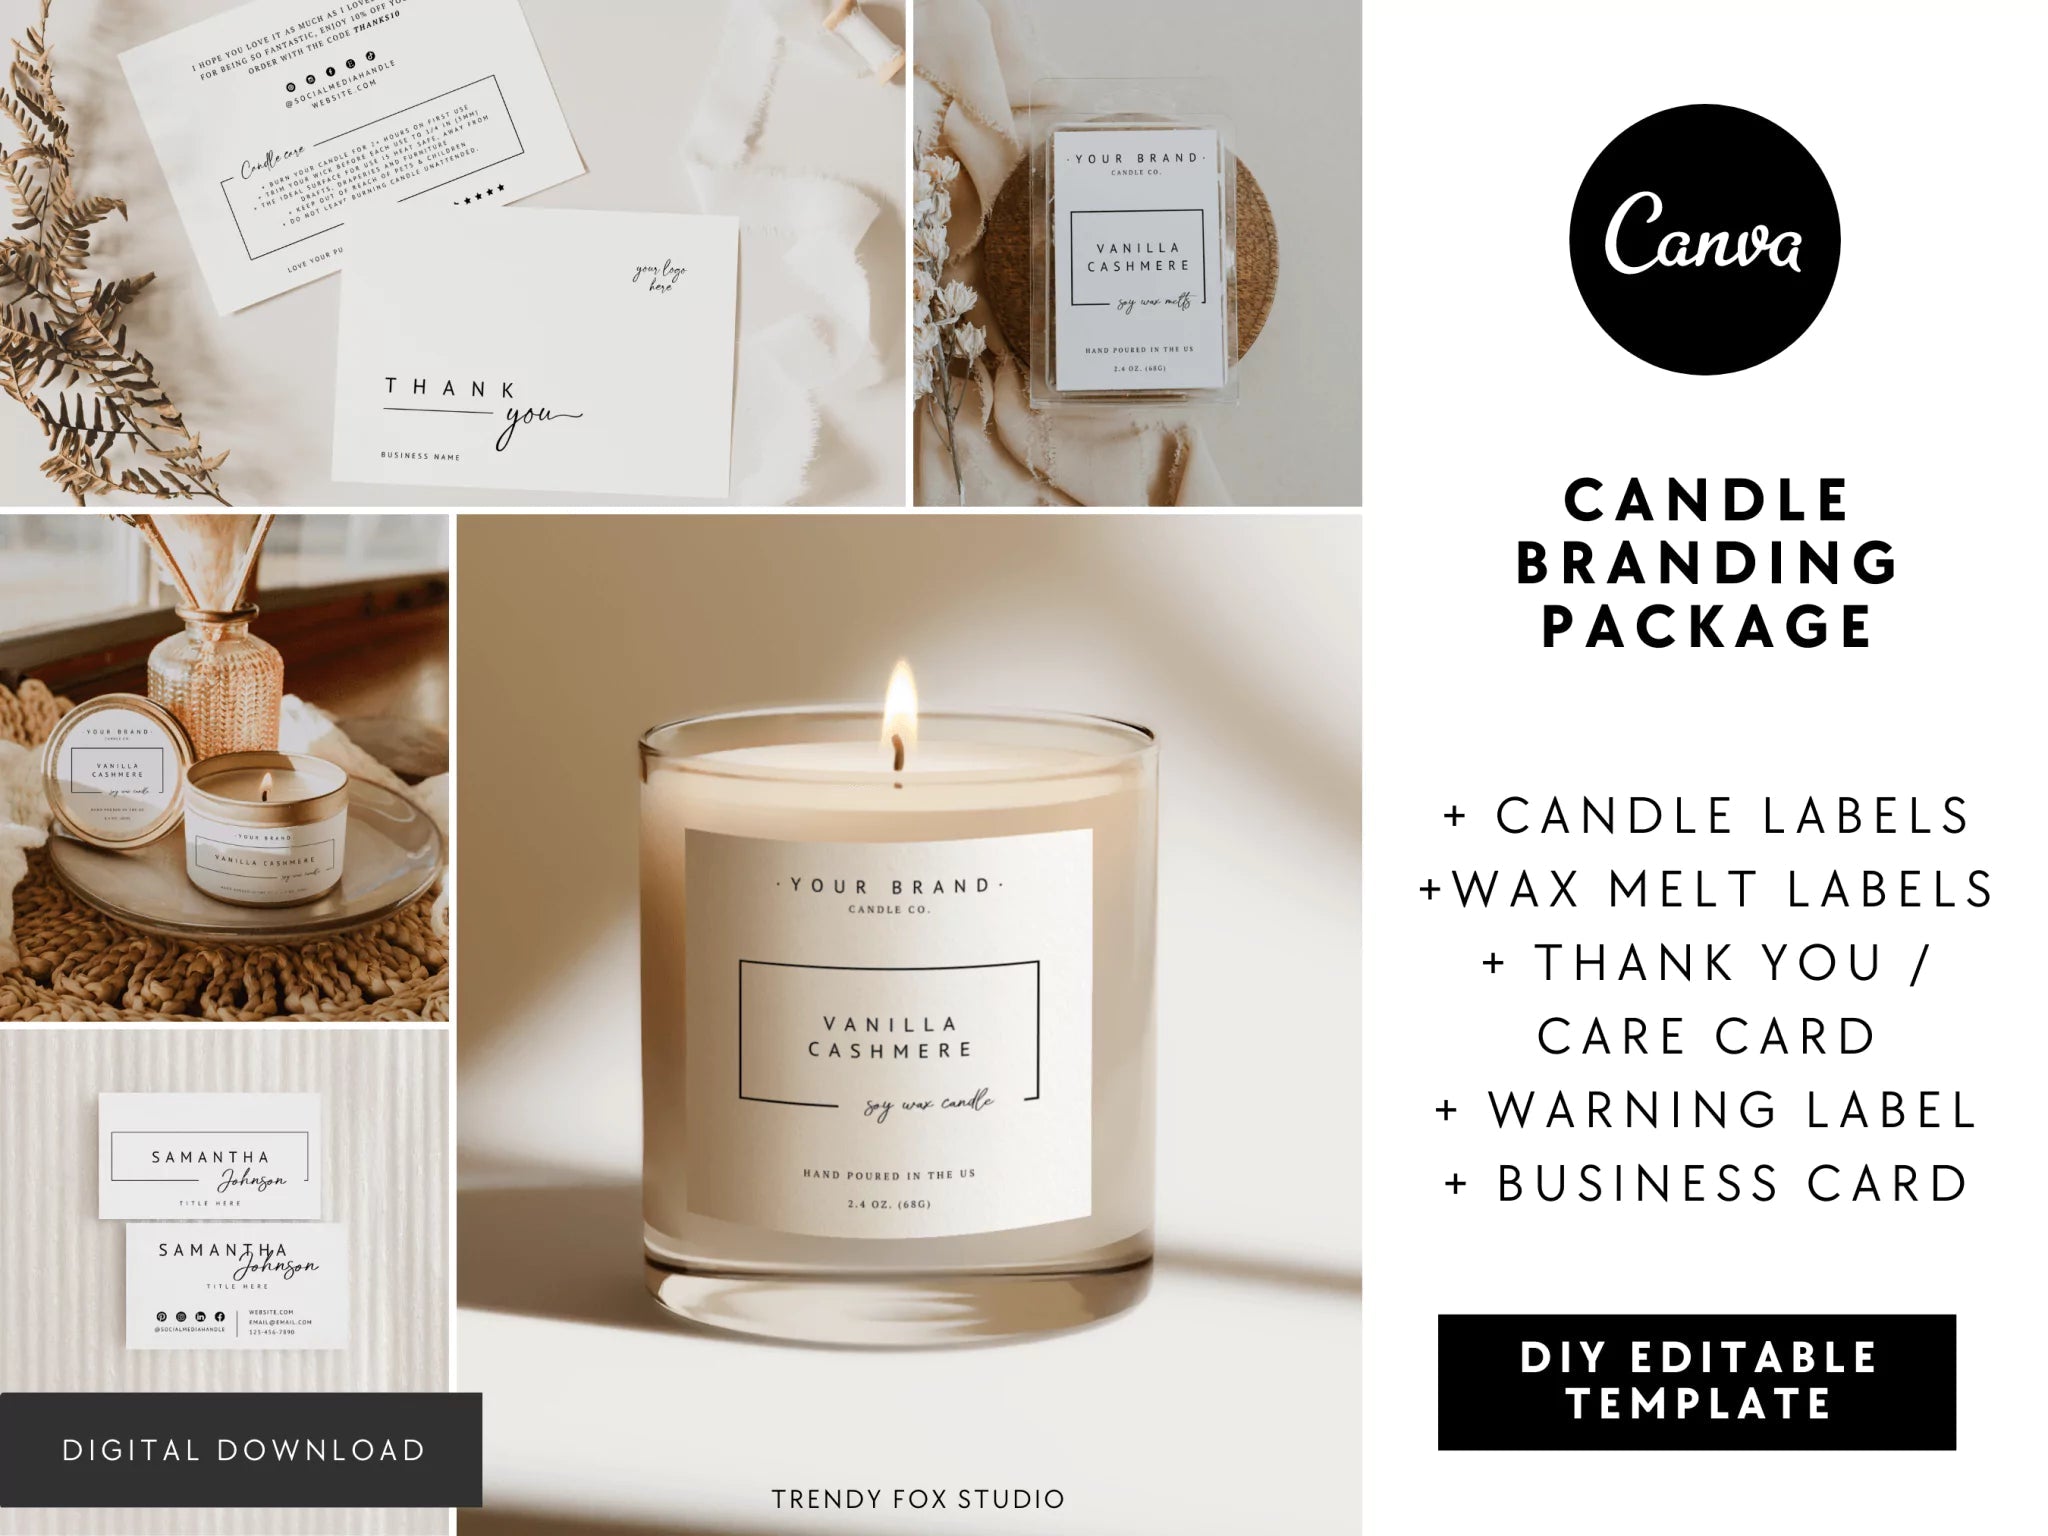 Candle Making Supplies Archives - Homemade Candle Creations